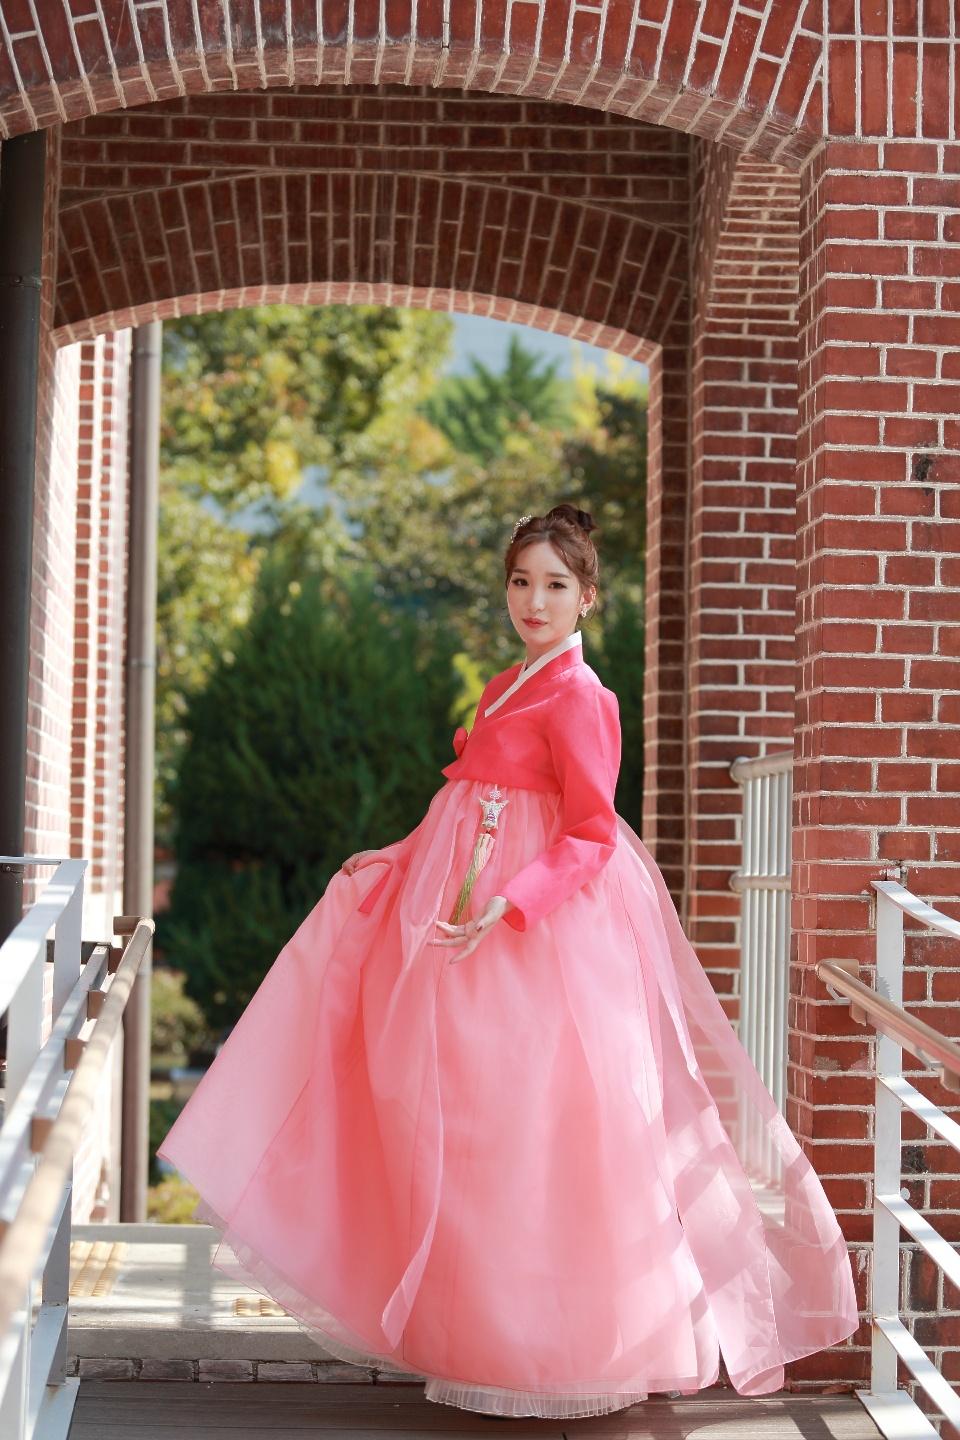 A model standing in front of <철수와영희>, a Busan Hanbok rental shop, wearing a pink traditional Korean gown.